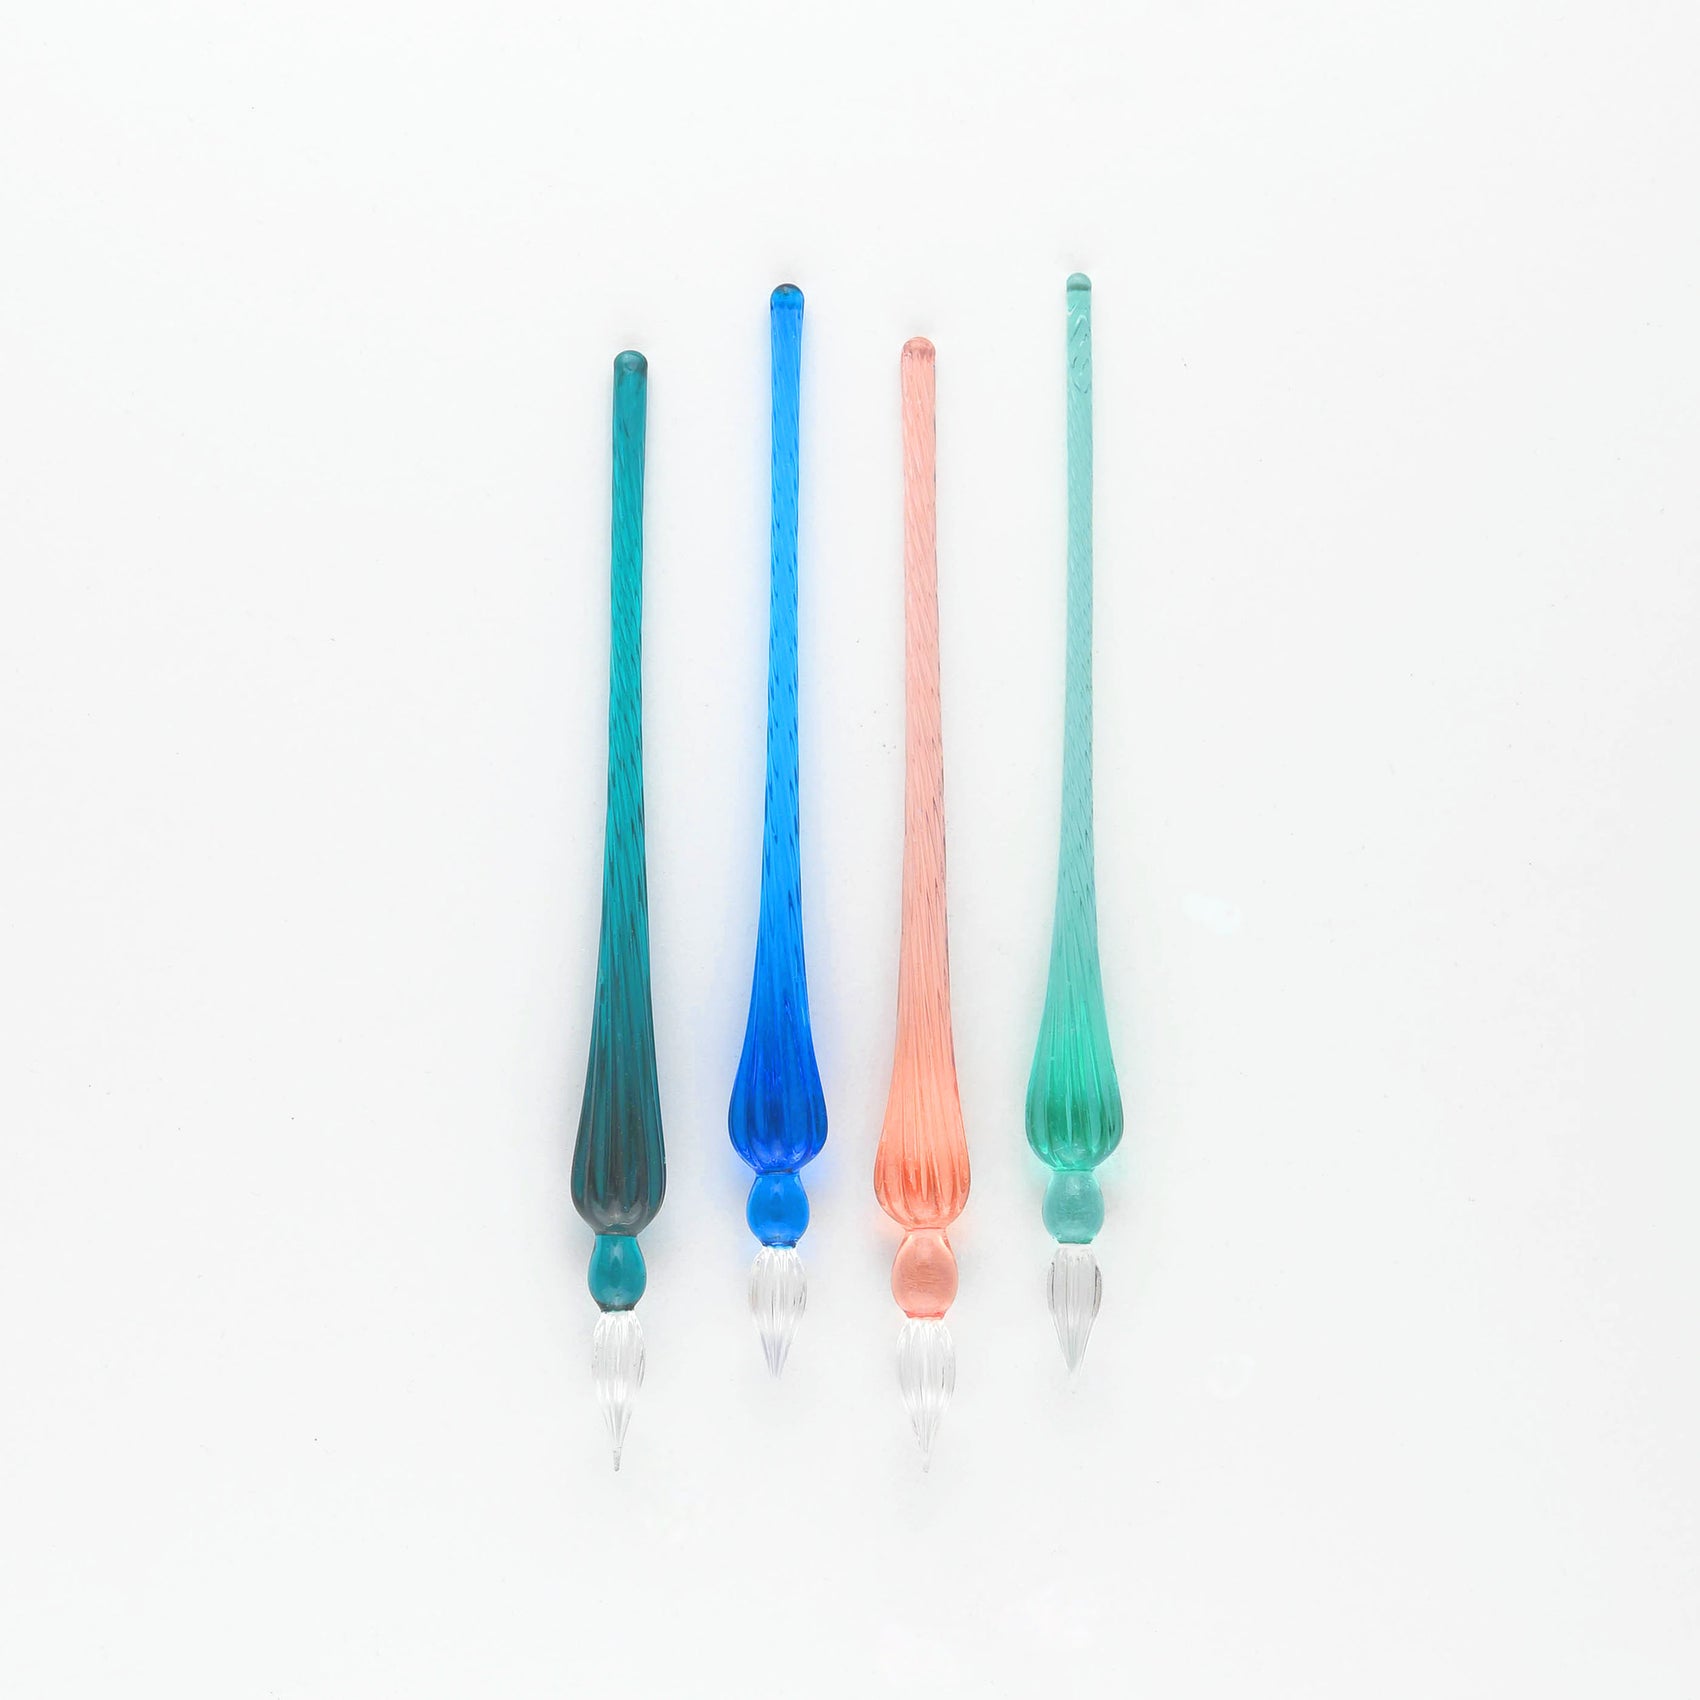 J. Herbin Glass Dip Pen | Emerald Green, Blue, Coral Or Turquoise